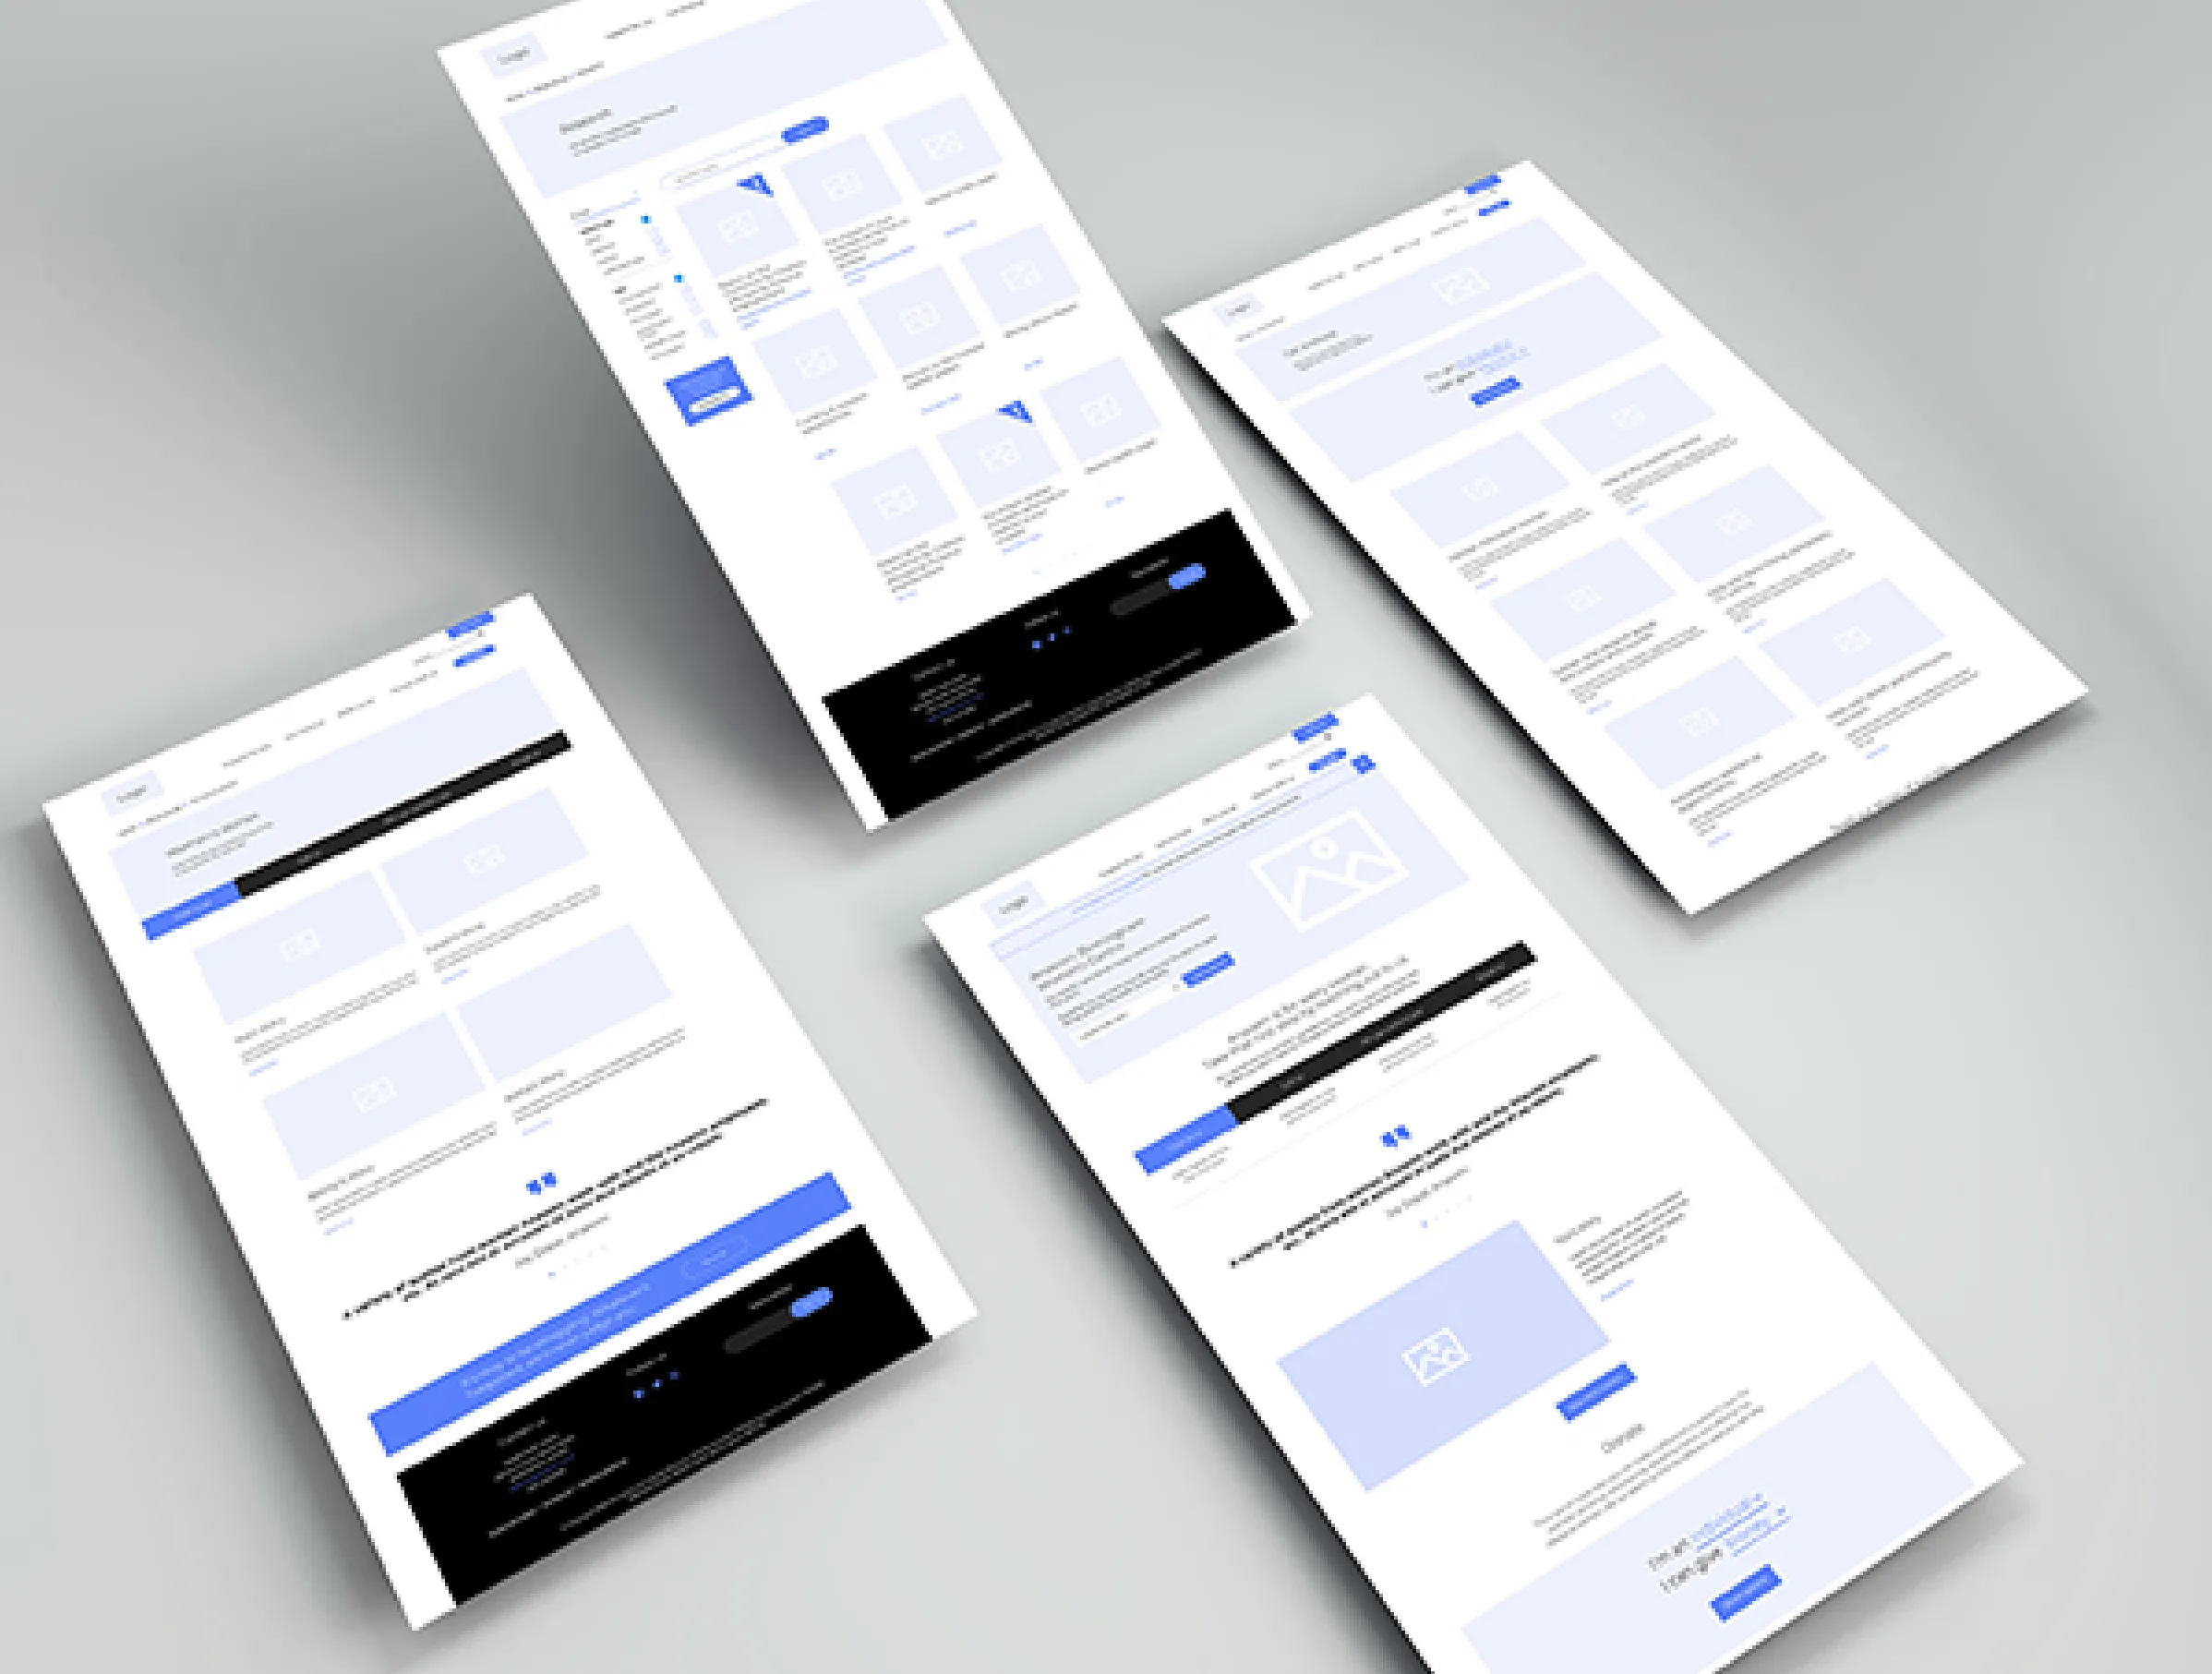 Anawim wireframes for the website